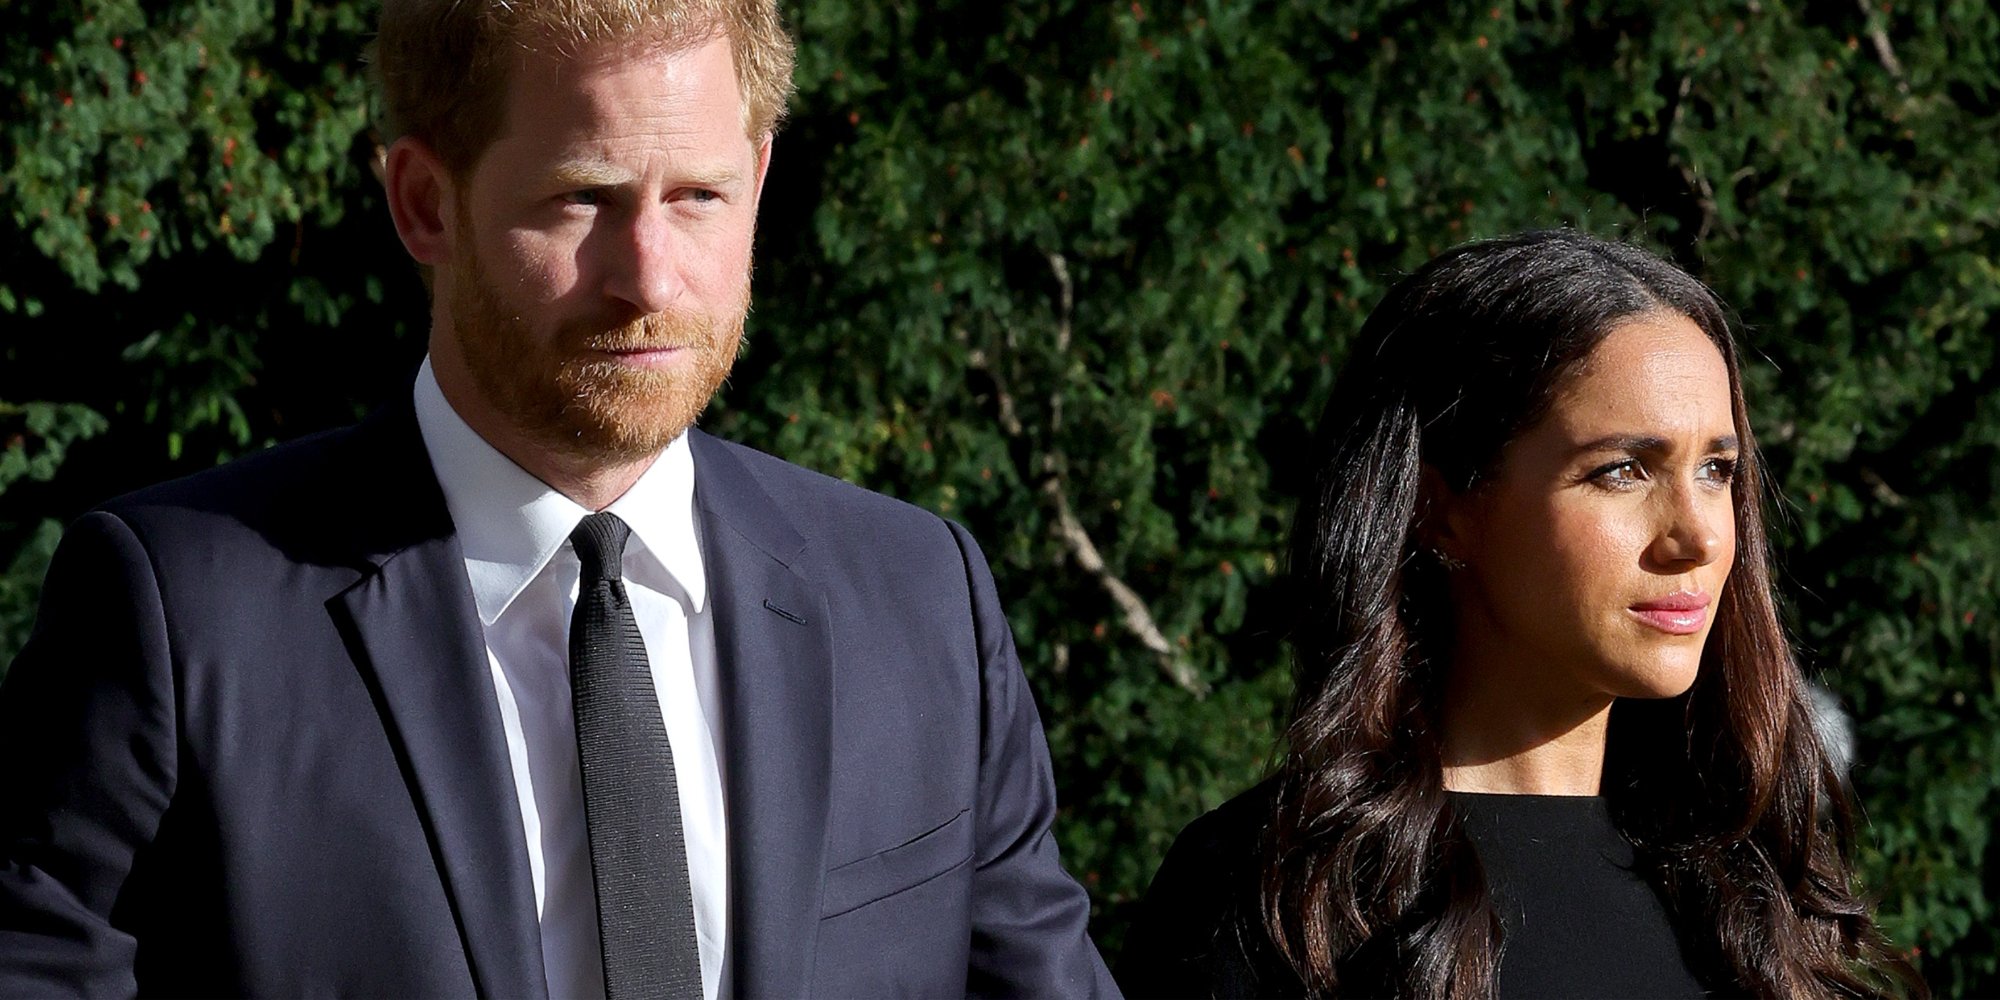 Prince Harry and Meghan Markle pay their respects to the late Queen Elizabeth in Scotland.